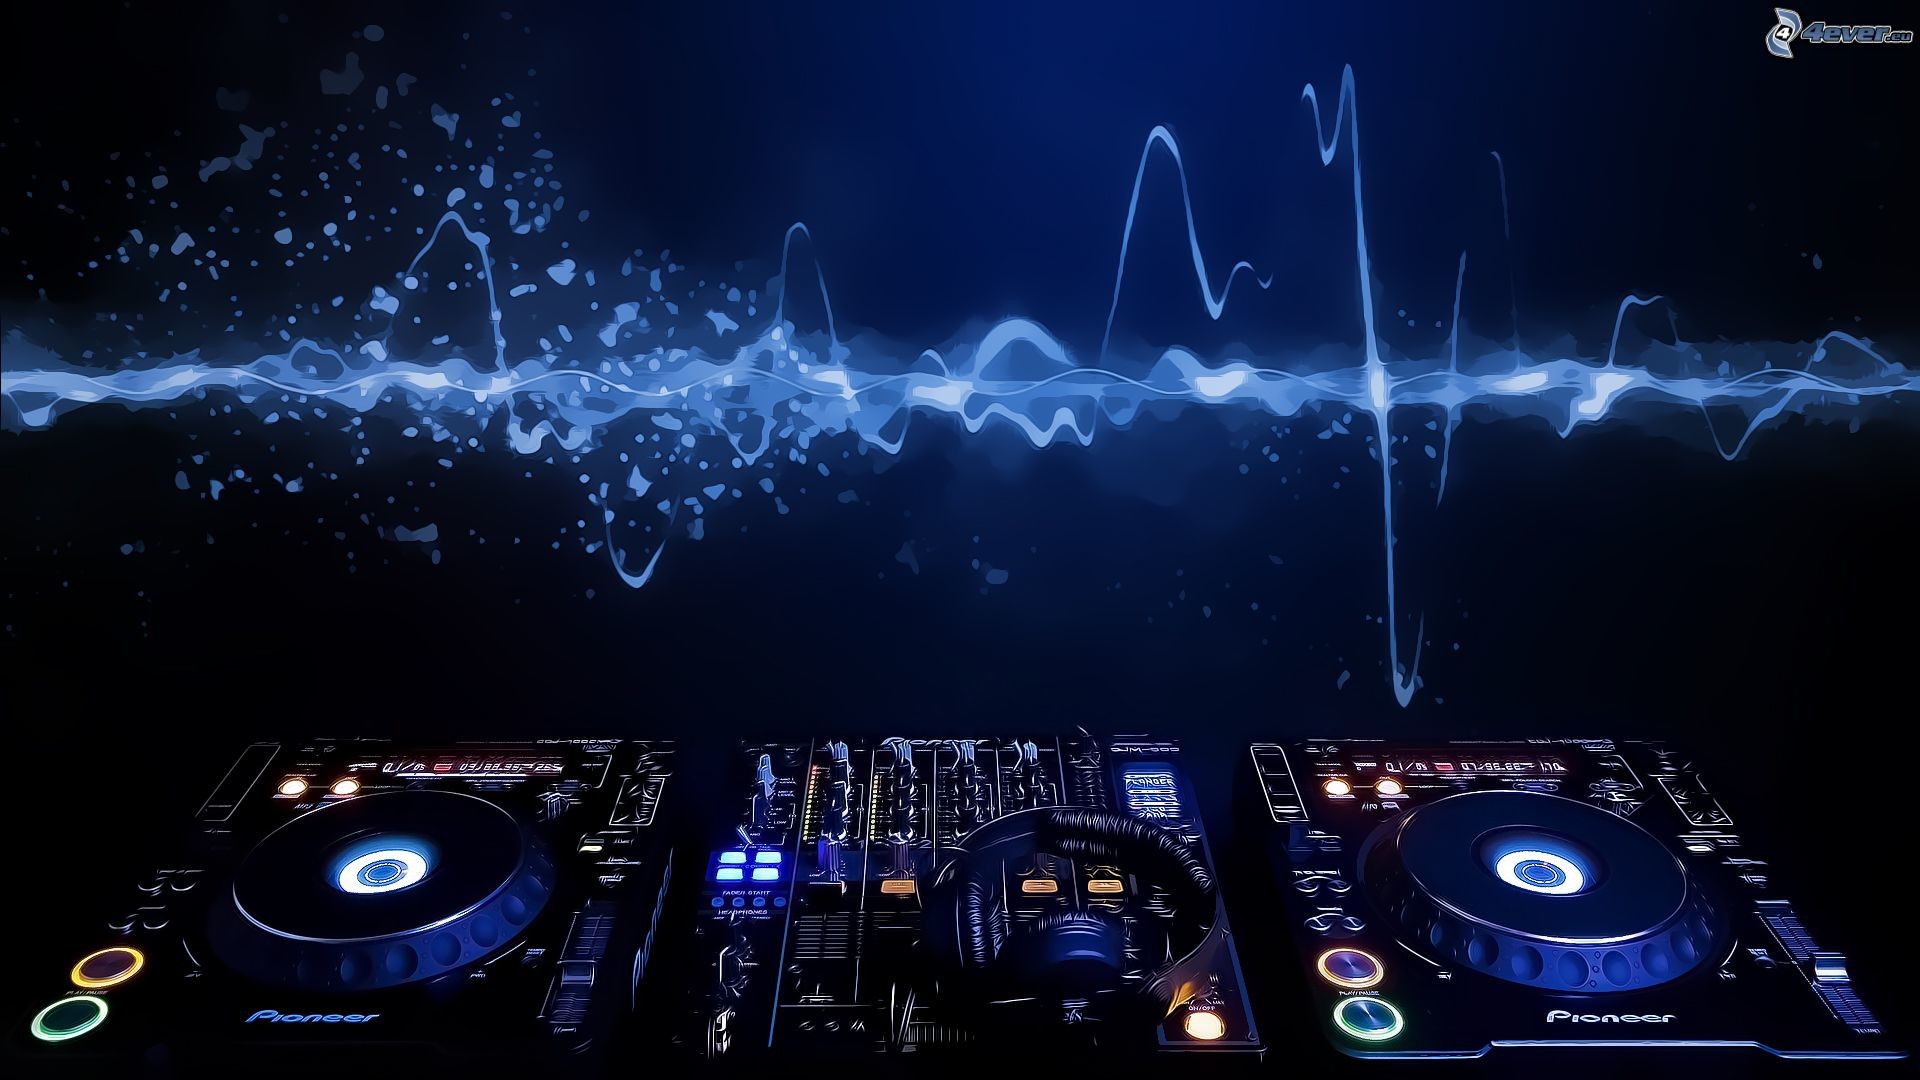 desktop backgrounds and hd wallpapers use this best gallery of dj hd .